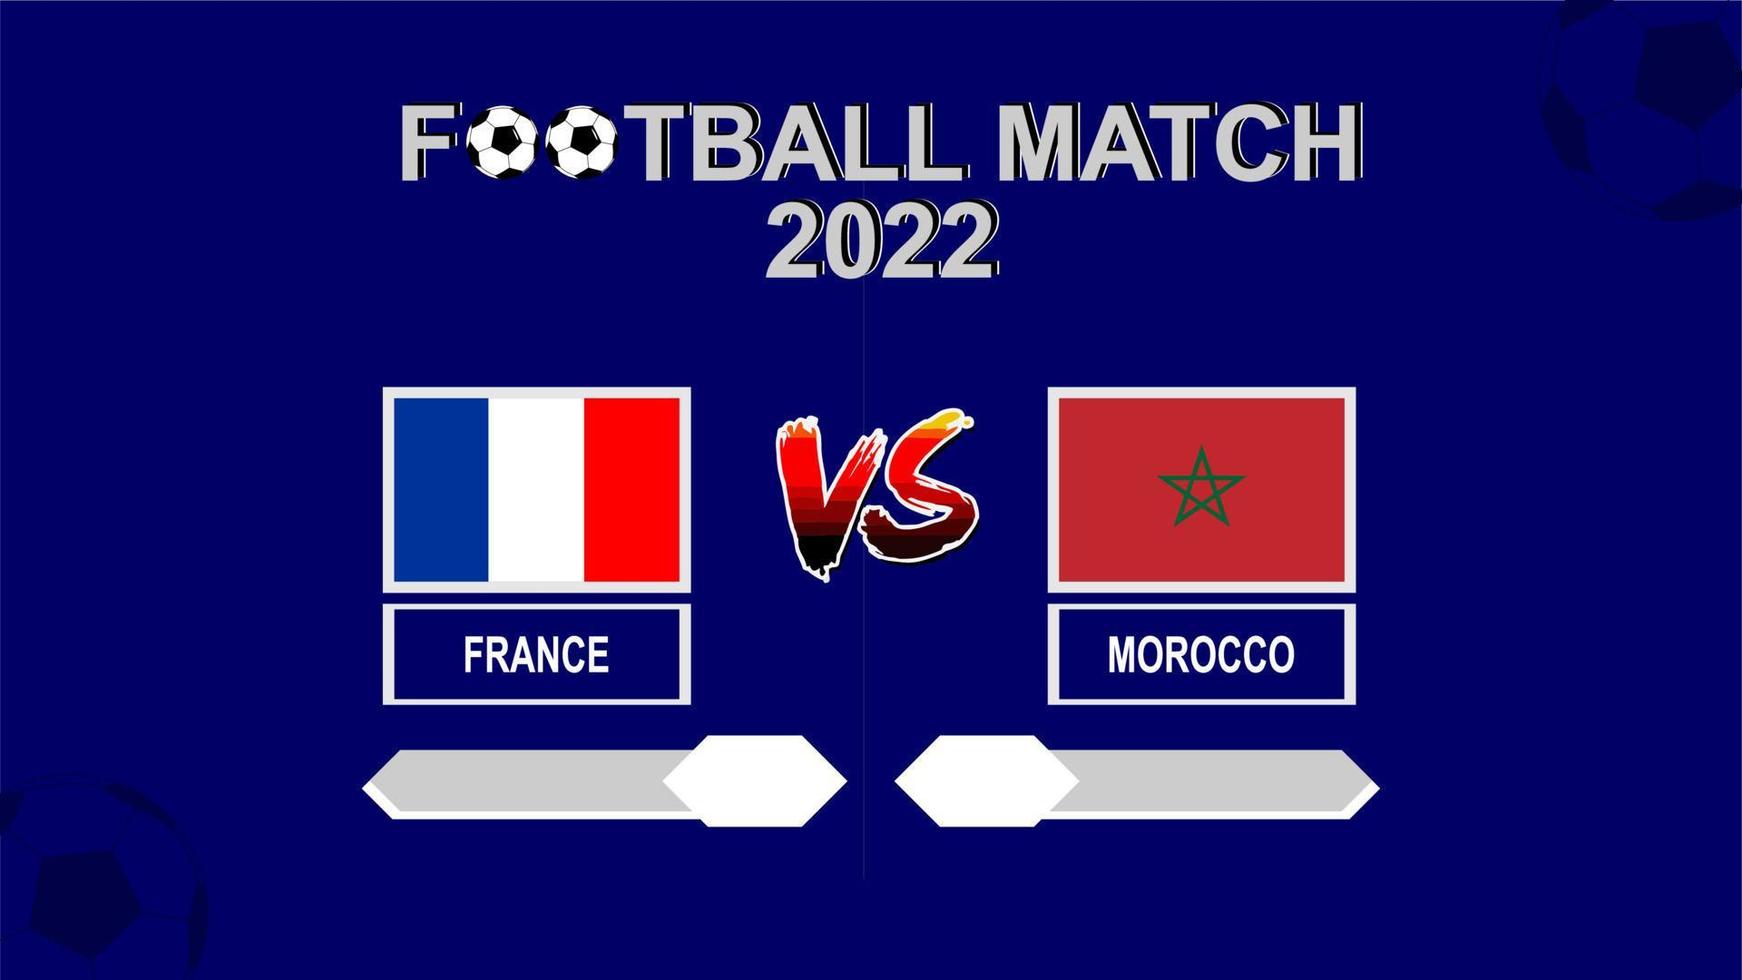 France vs Morocco football cup 2022 blue template background vector for schedule or result match semi final